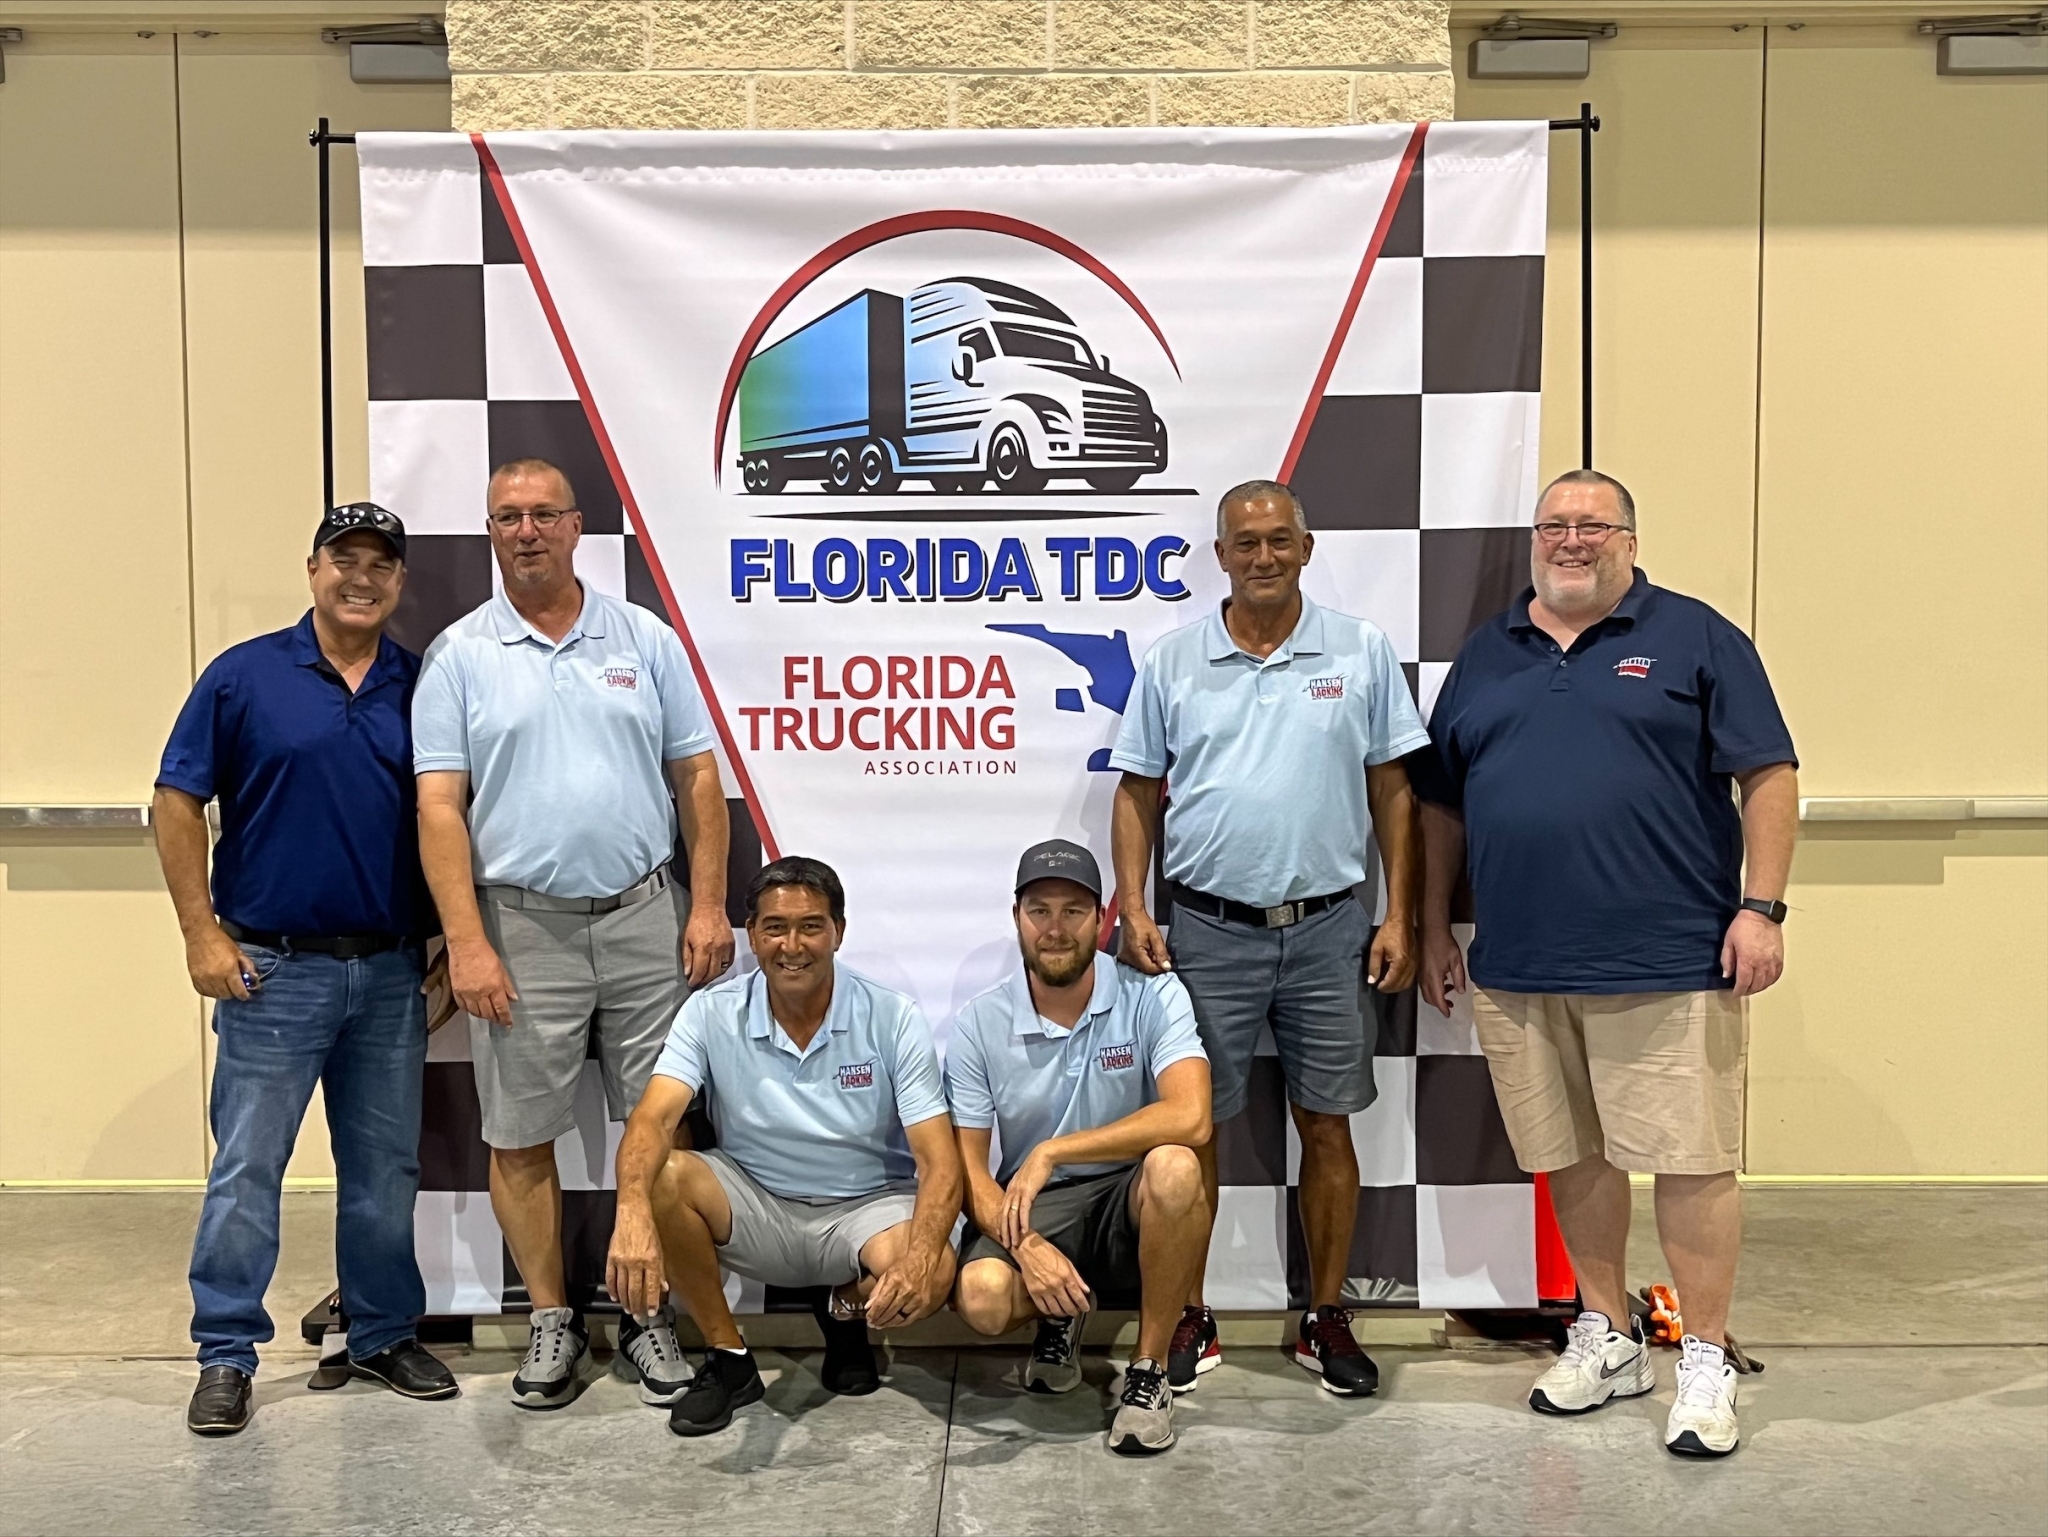 An Interview with Two Florida Truck Driving Championship Medalists